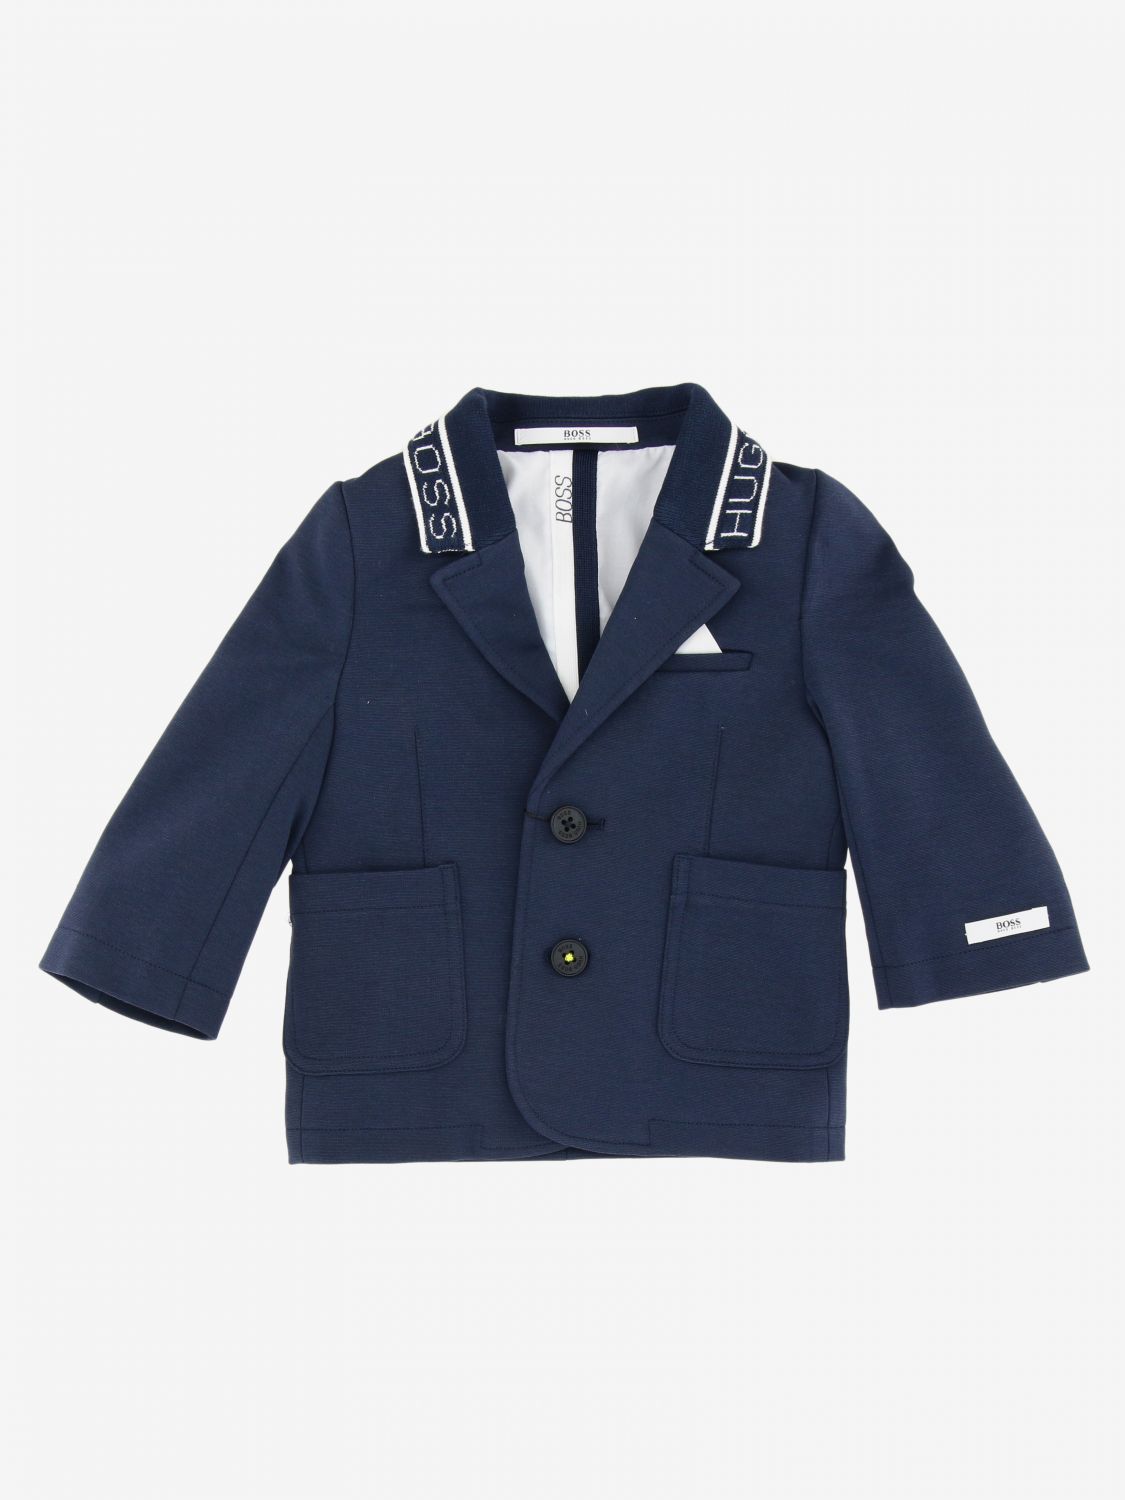 Hugo Boss Outlet: Giacca a monopetto | Giacca Hugo Boss Bambino Blue | Giacca  Hugo Boss J06208 Giglio IT